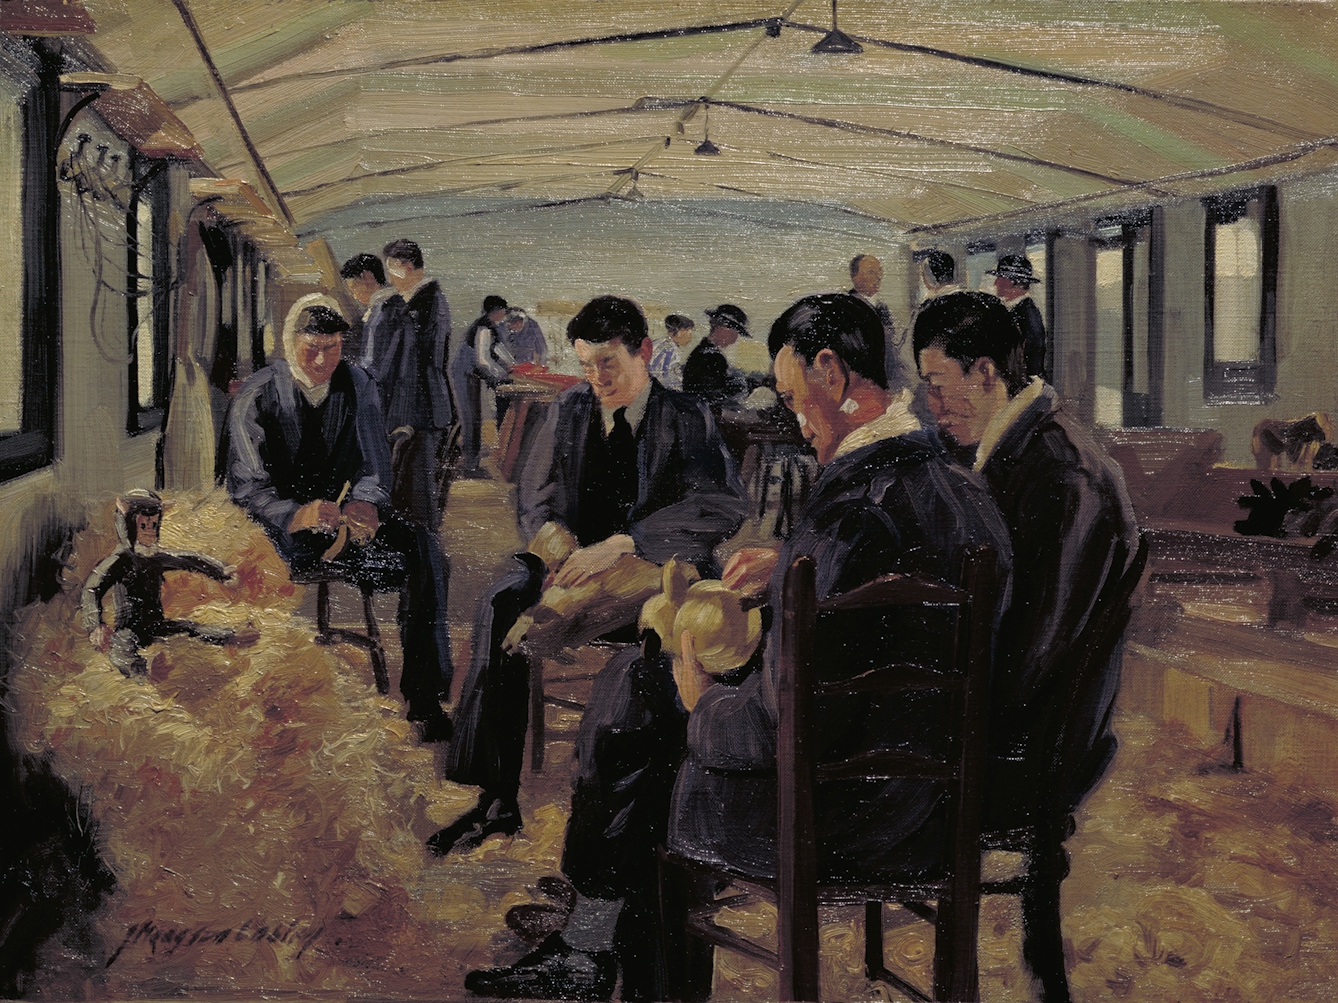 Four men, some with bandaged facial injuries, sitting on chairs in a makeshift hospital room.